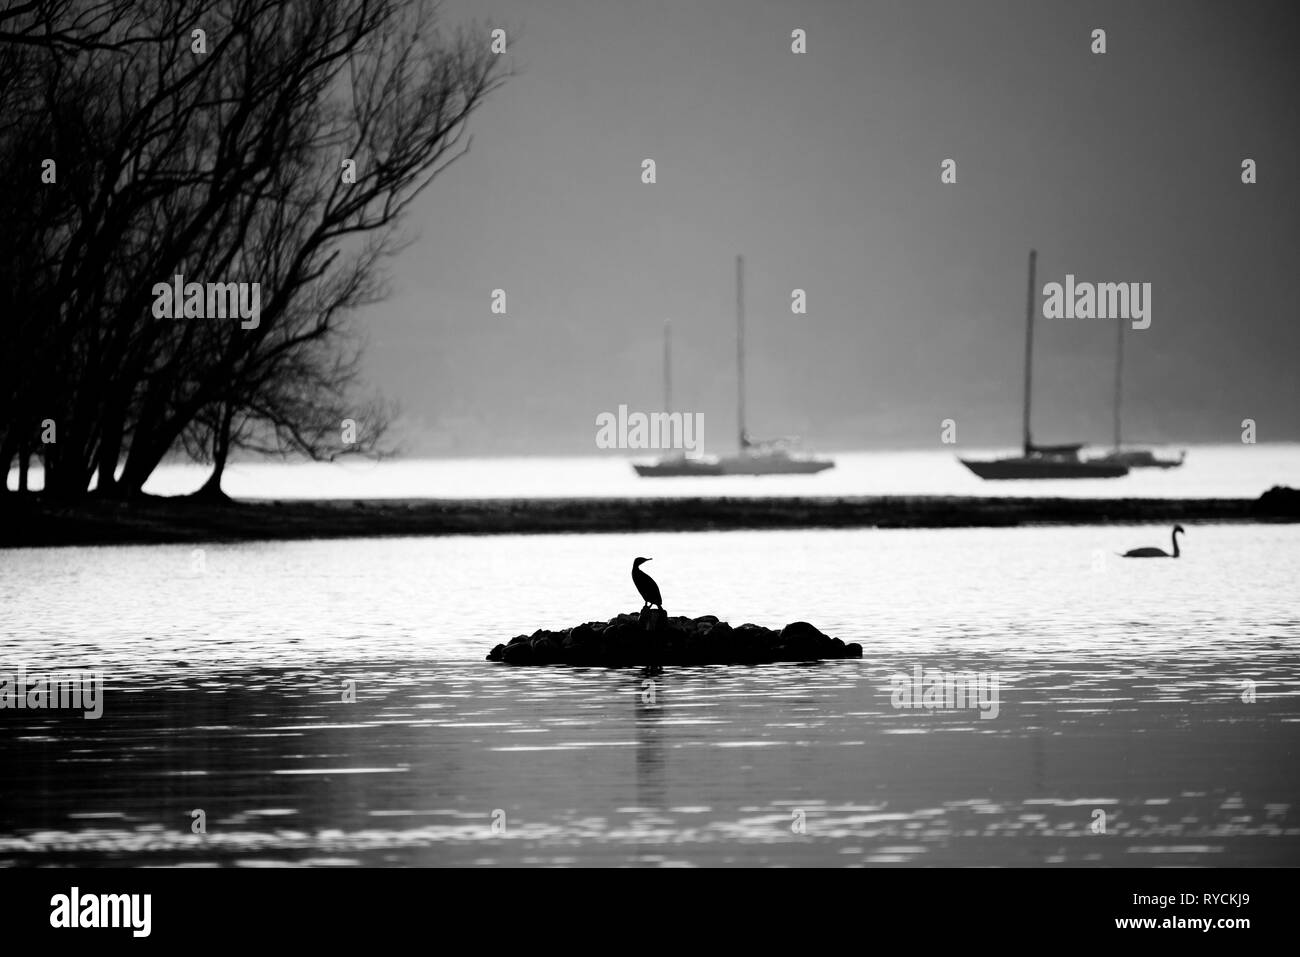 Ships moored on the river with cormorant bird Stock Photo